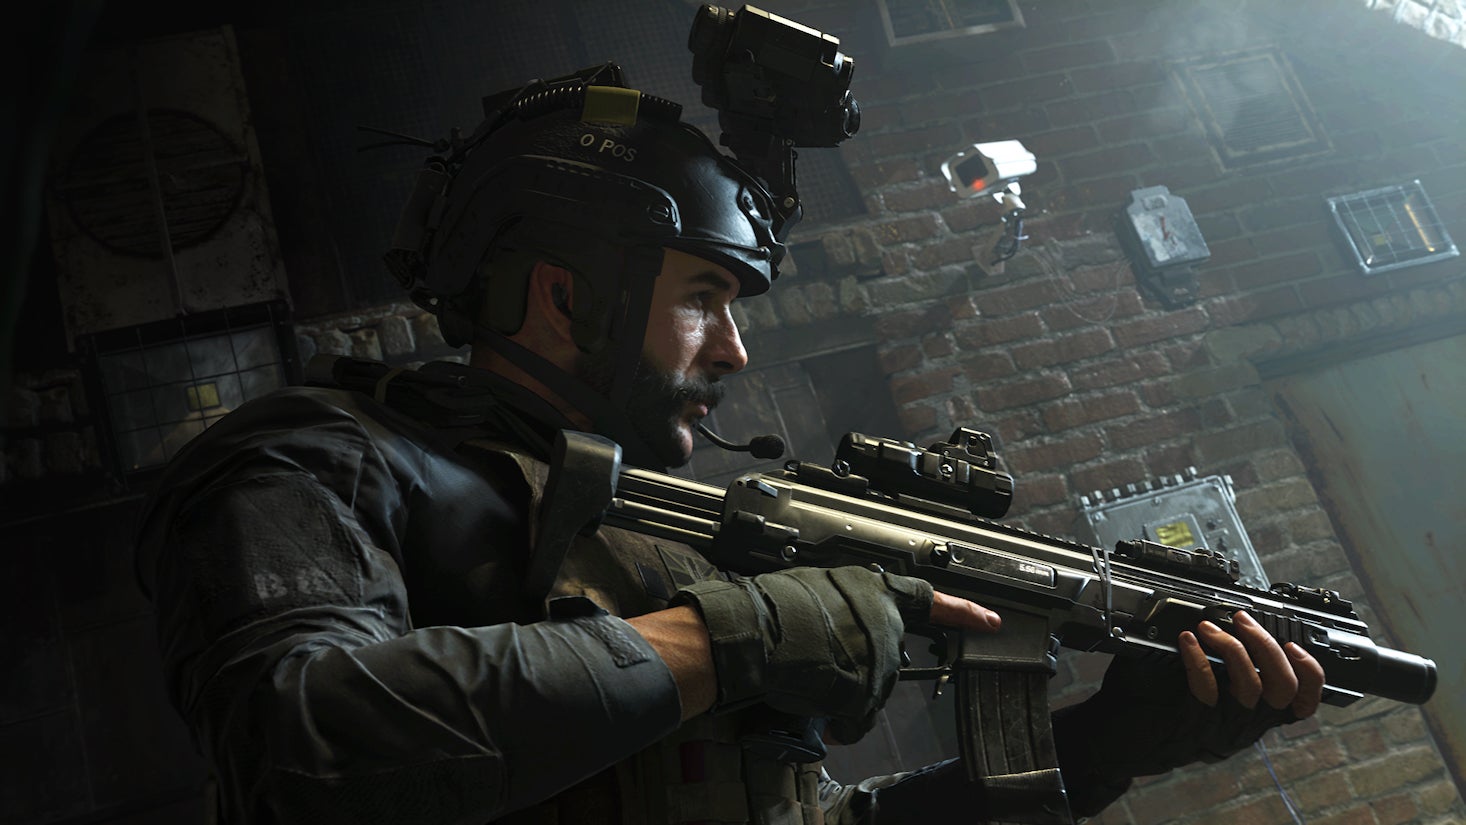 Screenshot from Call of Duty Modern Warfare showing a soldier holding a rifle